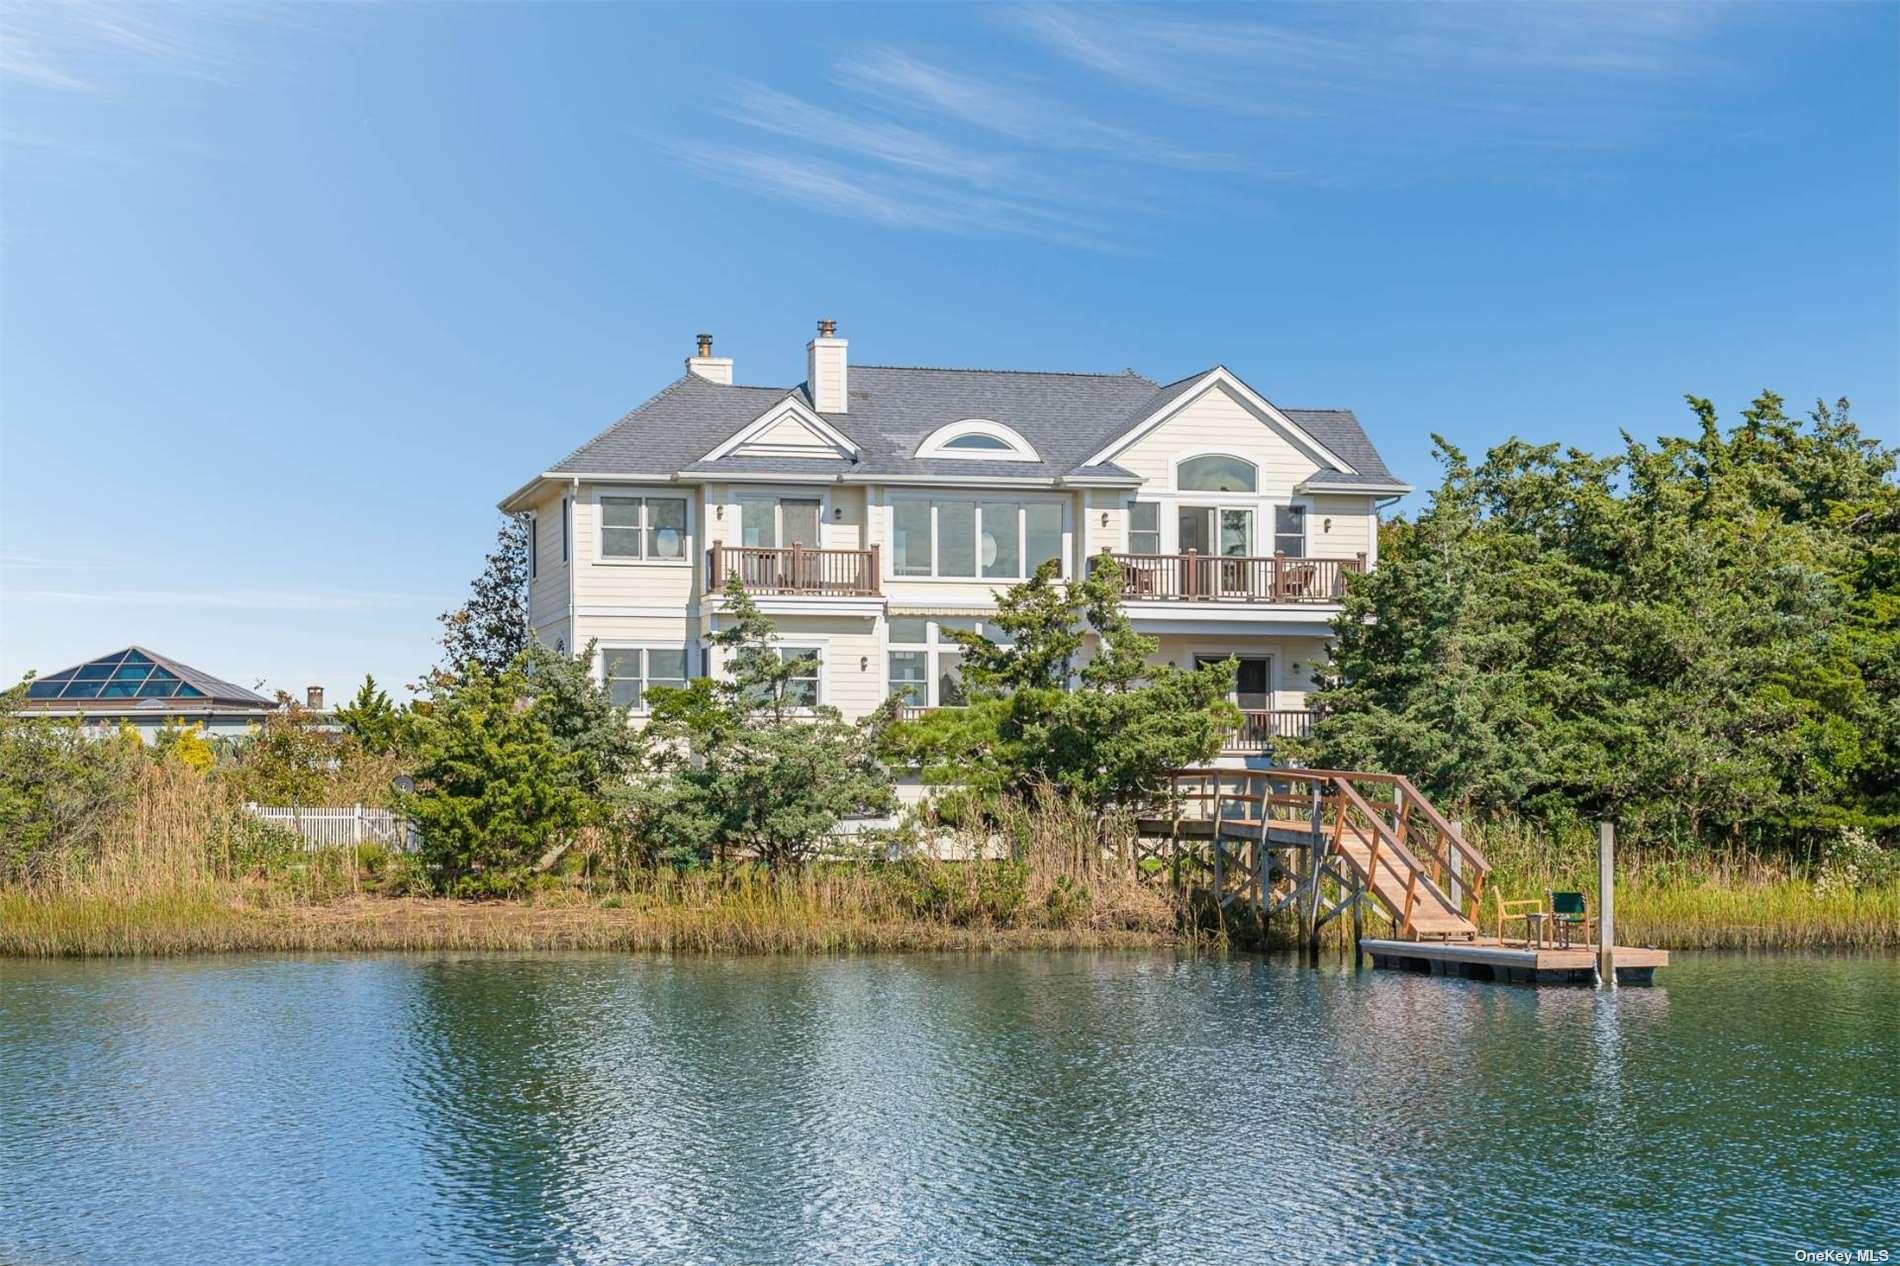 125 Seafield Point in Long Island, Westhampton Bch, NY 11978